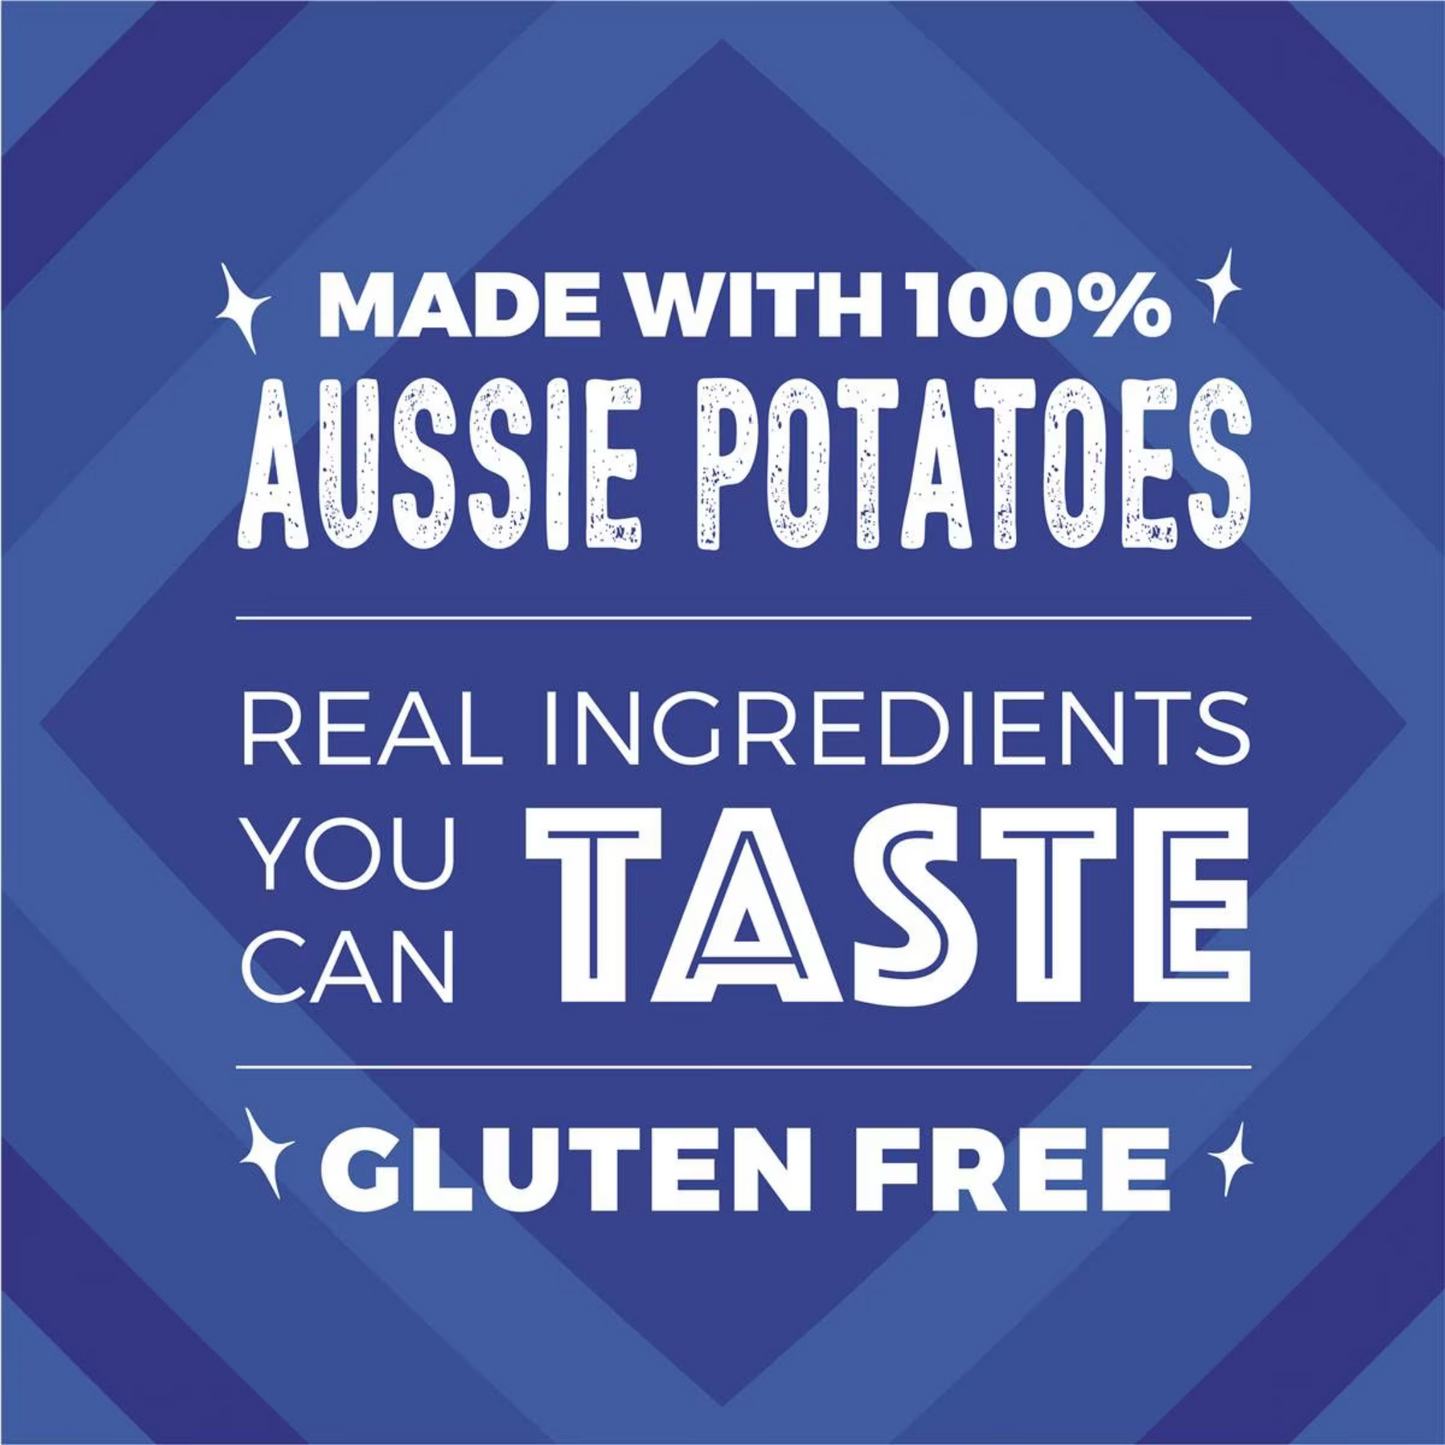 Smith's Crinkle Cut Potato Chips are made with 100% Australian potatoes & real ingredients that you can taste. Original salted flavour. Made from top quality Aussie potatoes. No artificial colours or flavours. Halal suitable. Gluten free. Best genuine foreign delicious snacks chip reasonable price in Dhaka Bangladesh.